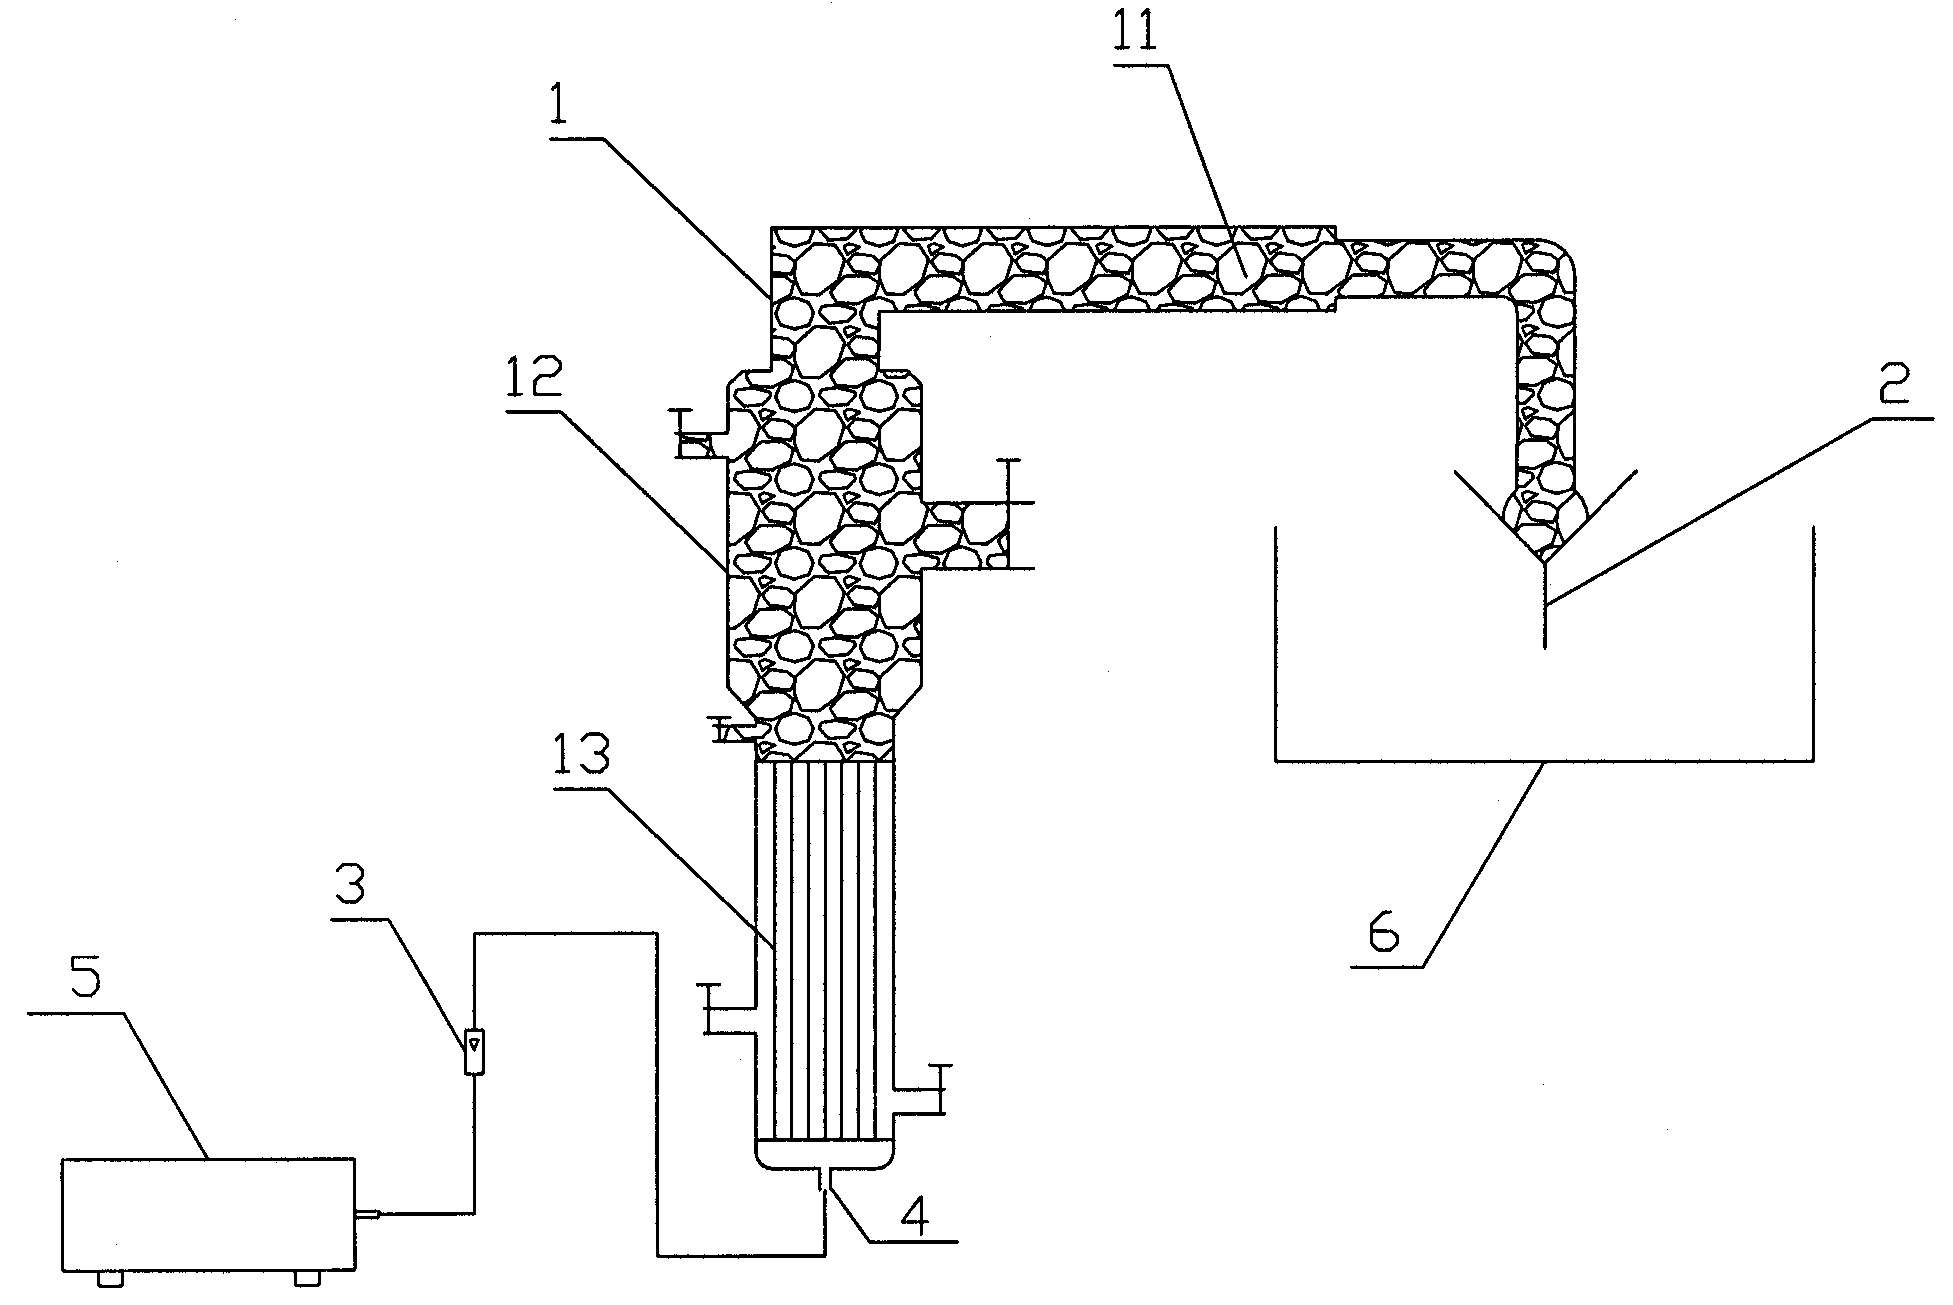 Device and method for foam separation of polysaccharides in Polyporus polysaccharide extract